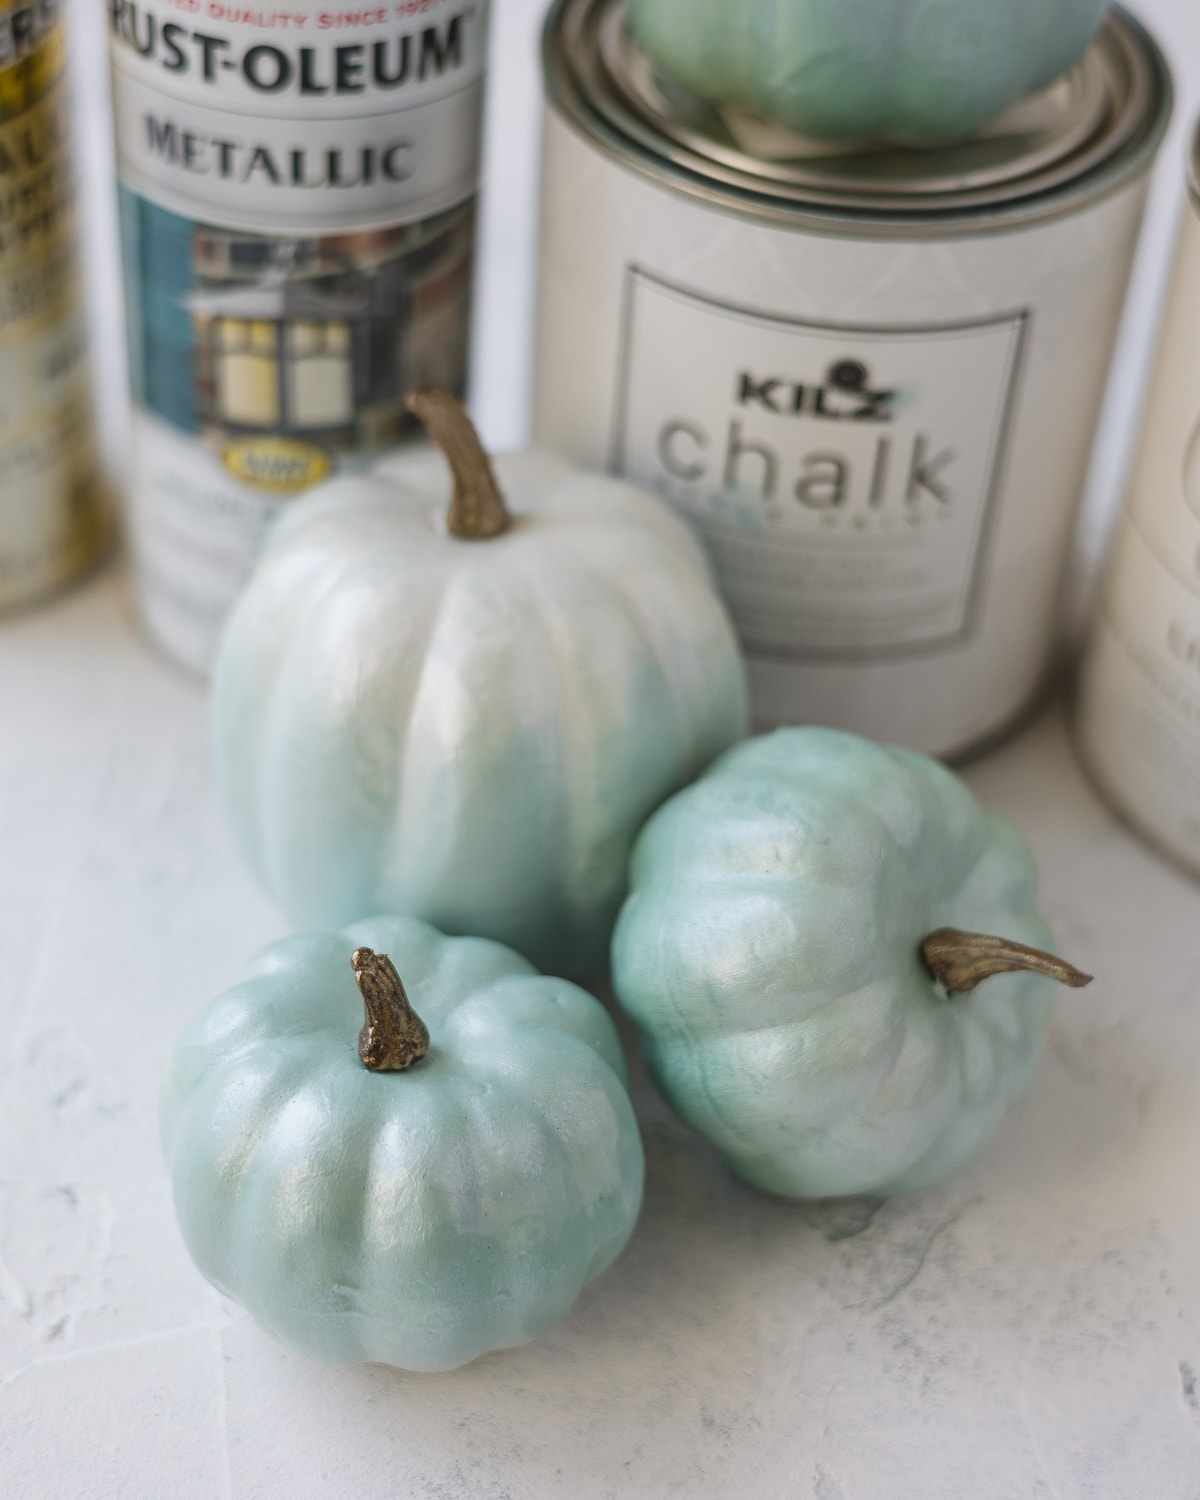 Chalk painted pumpkins with chalk paint cans in the background.